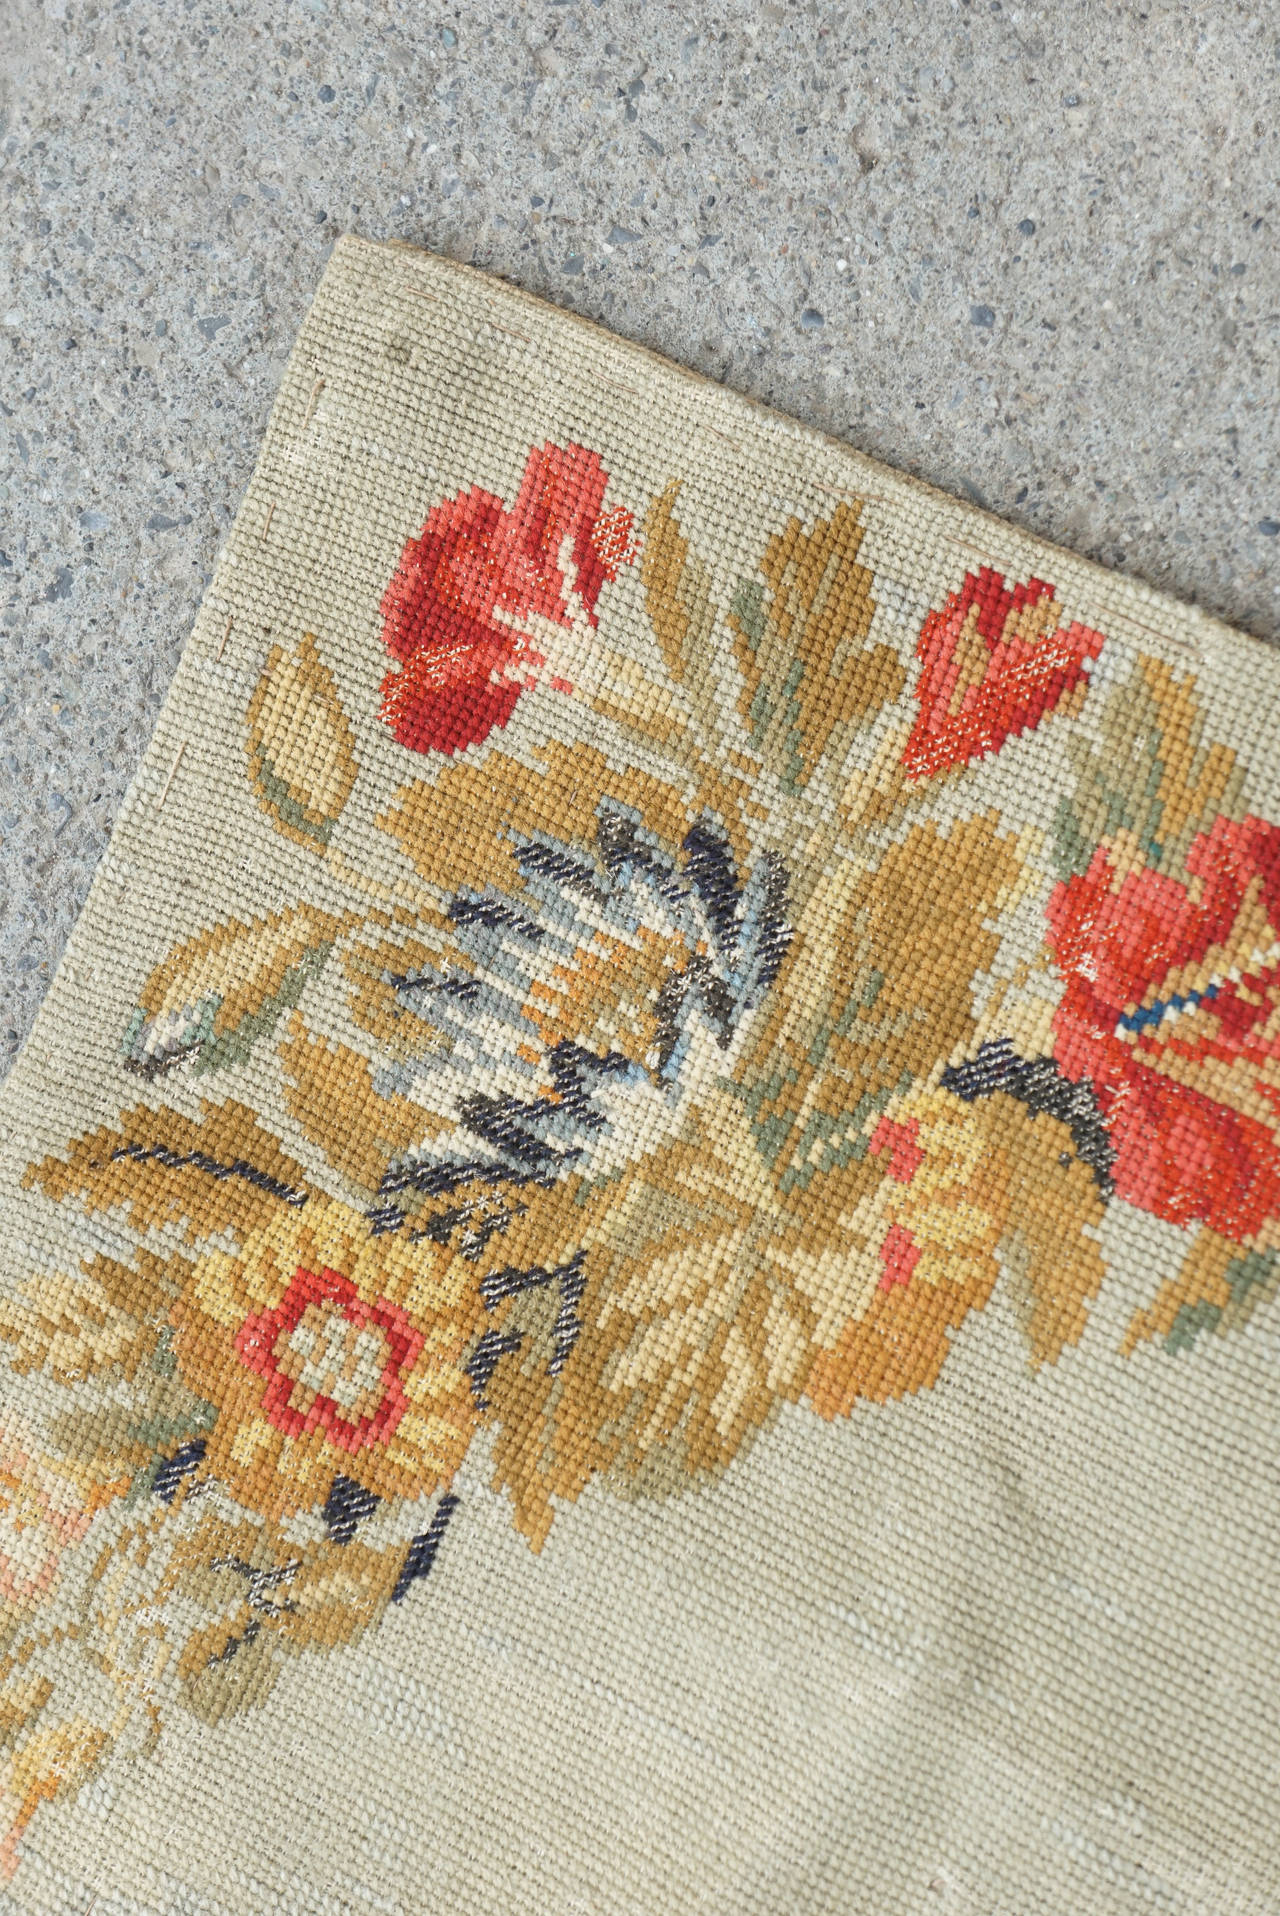 This fine old rug from the mid 19th century was made in England and retains many bright colors and details in the stitch patterns. Done in petit and gross point with woolen thread this rug is a fine example from an early period. The piece has